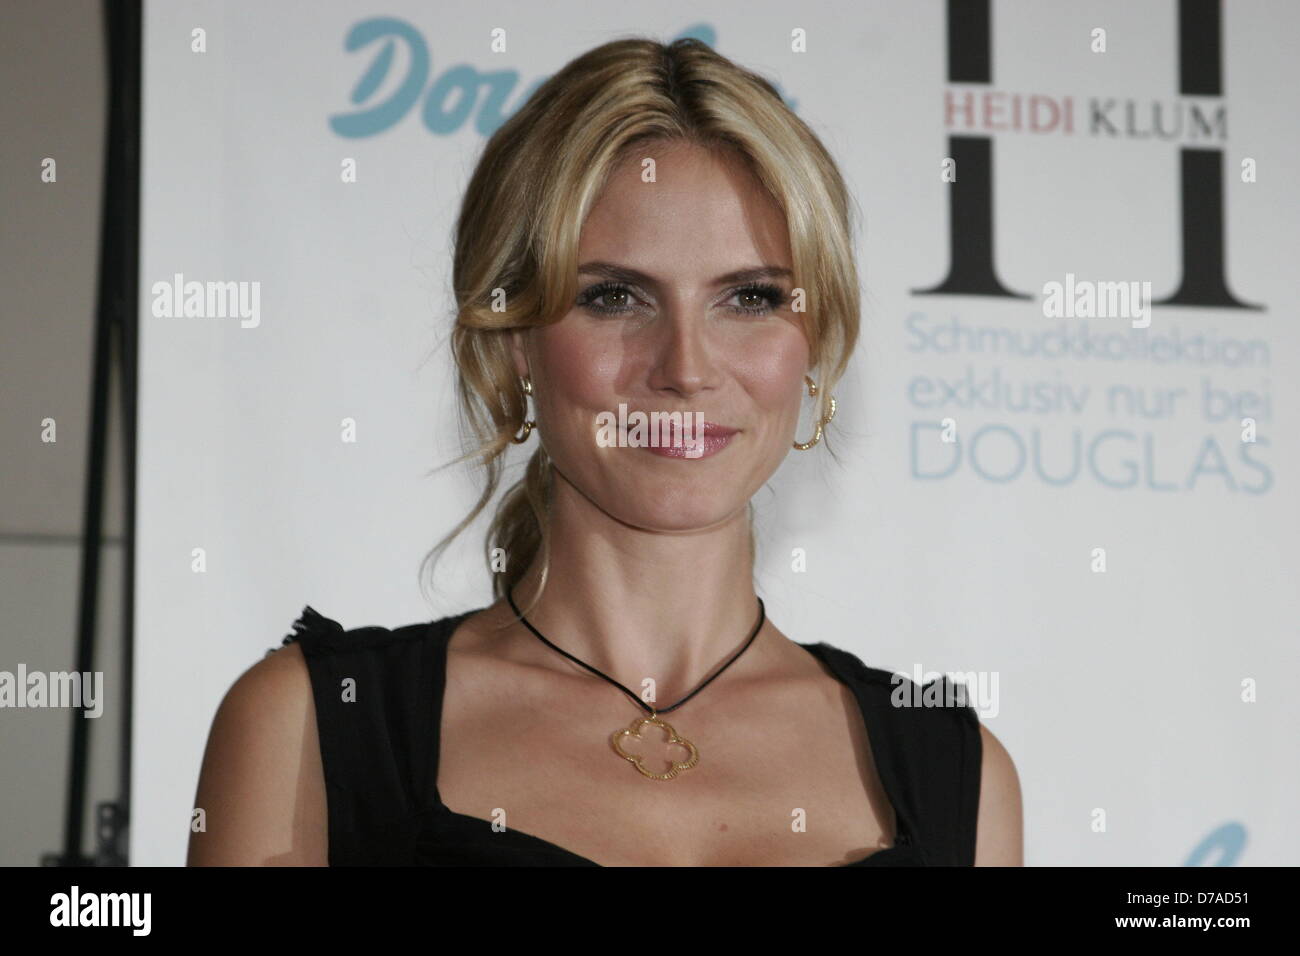 Heidi Klum at the presentation of the jewellery collection of Douglas in  Berlin Stock Photo - Alamy